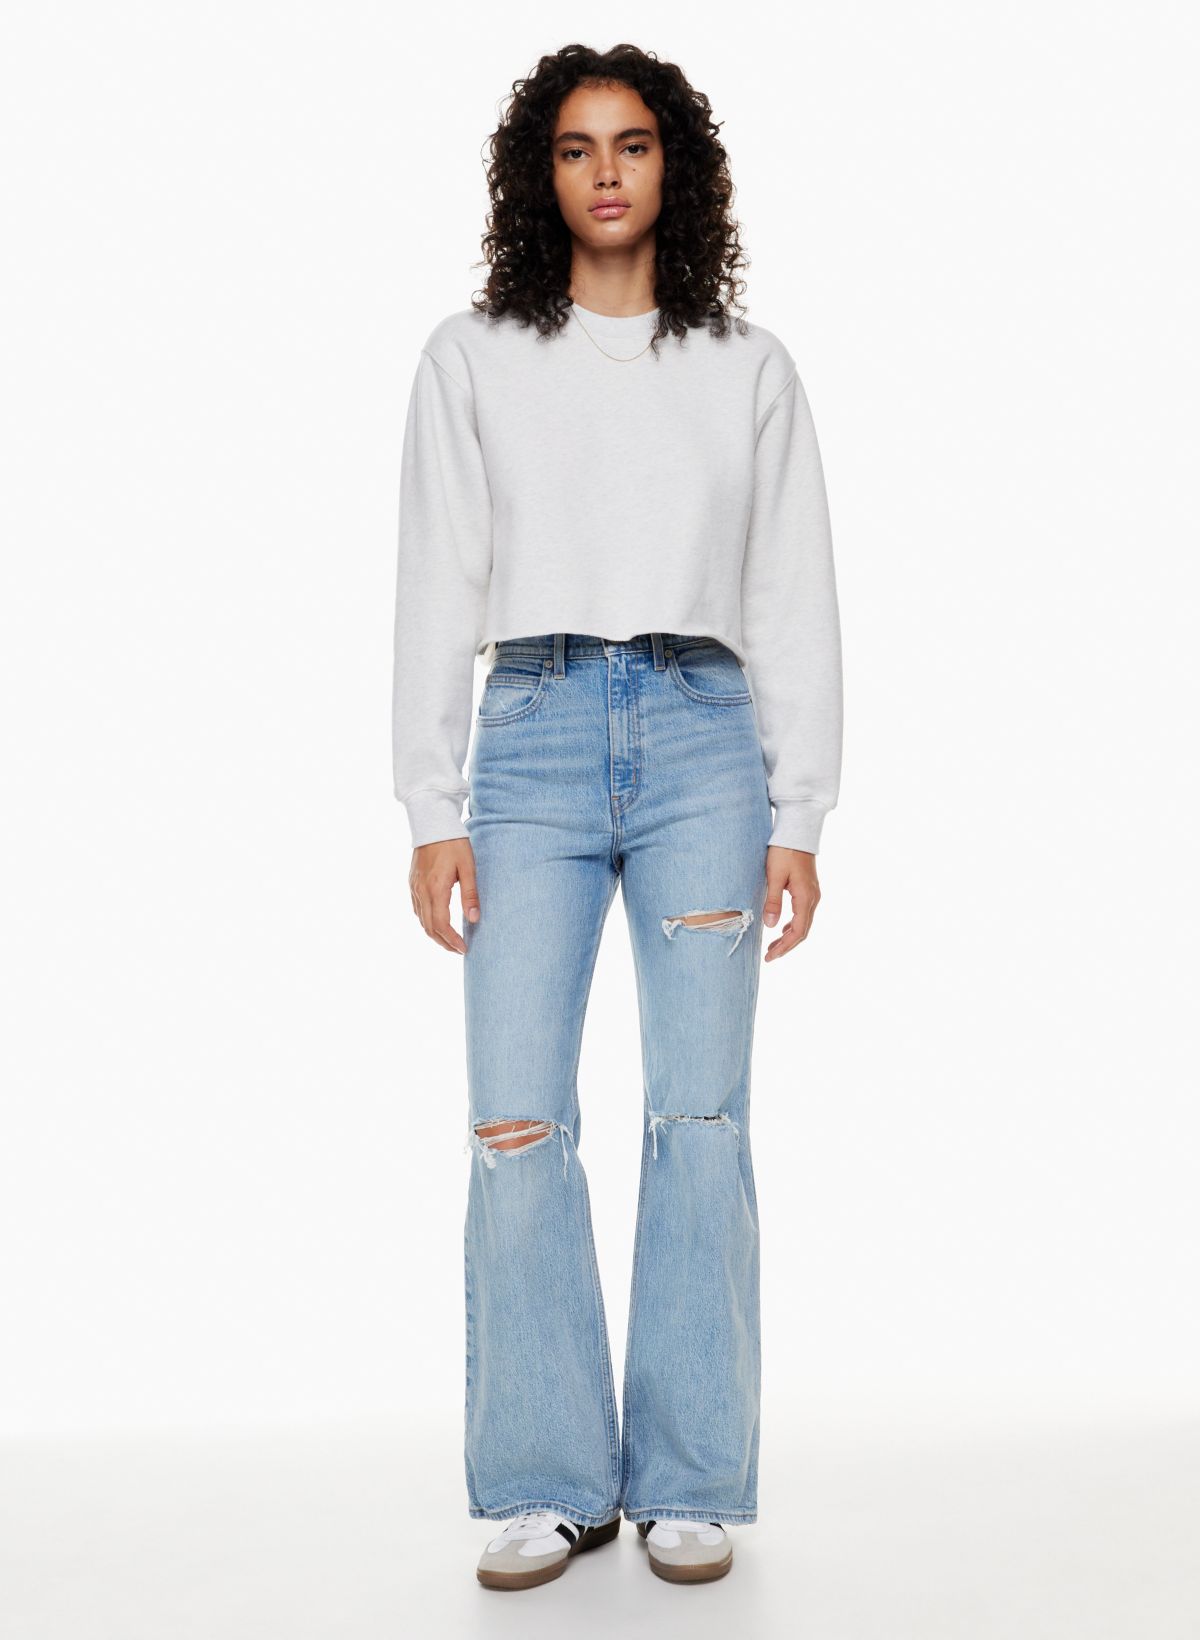 Levi's 70's high flare jeans in indigo